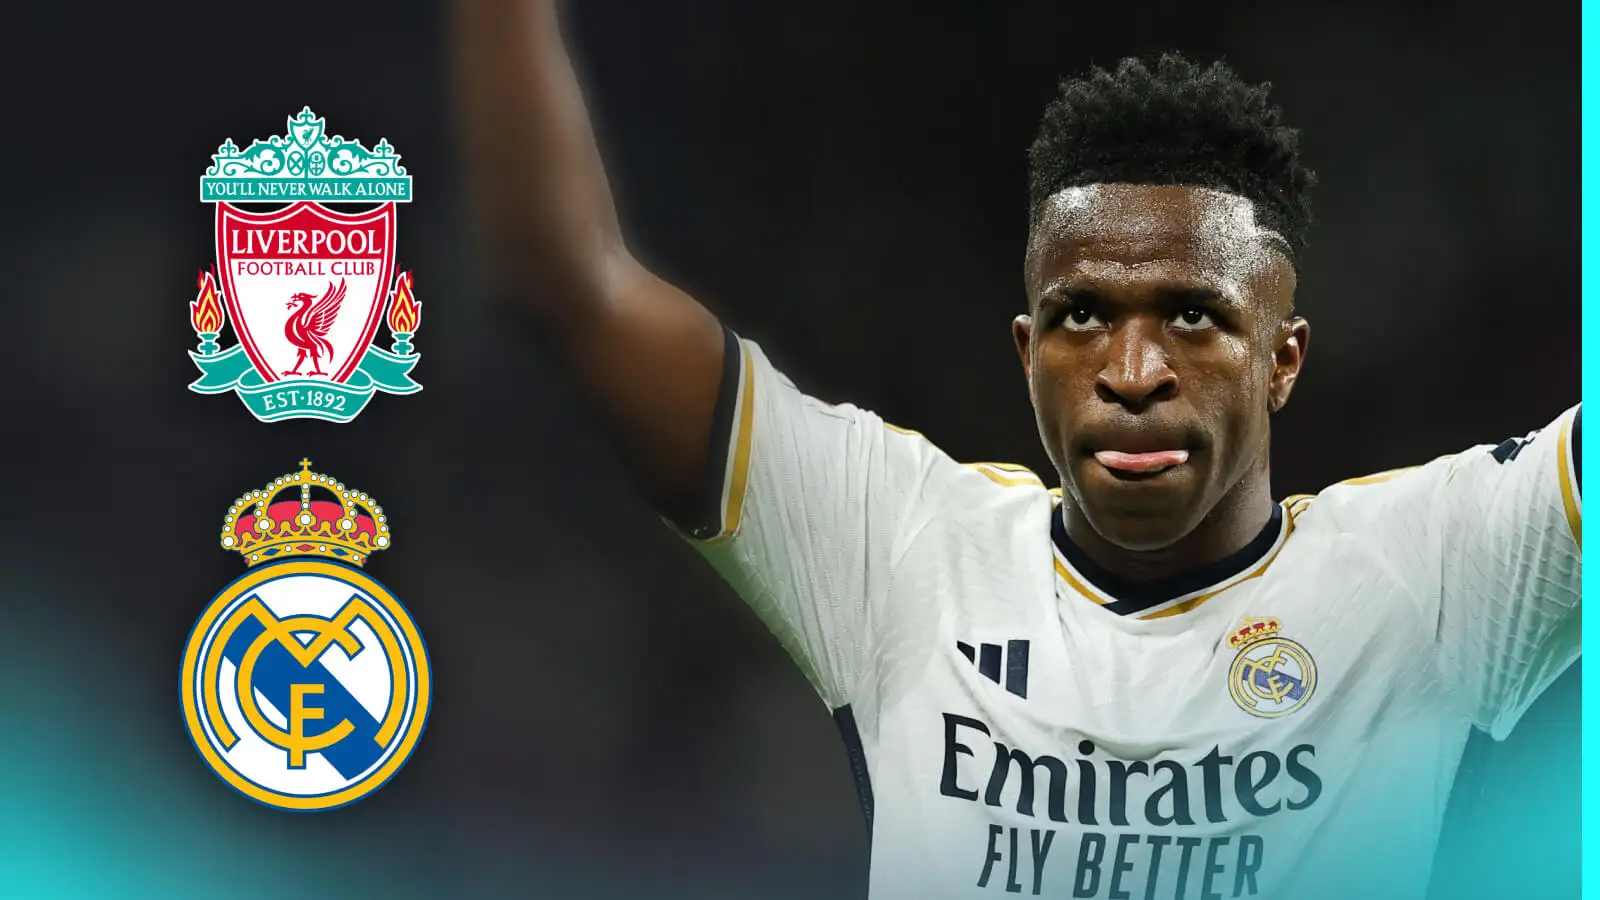 Transfer expert insists Real Madrid exit ‘not unrealistic’ after Liverpool ‘reach’ British transfer record